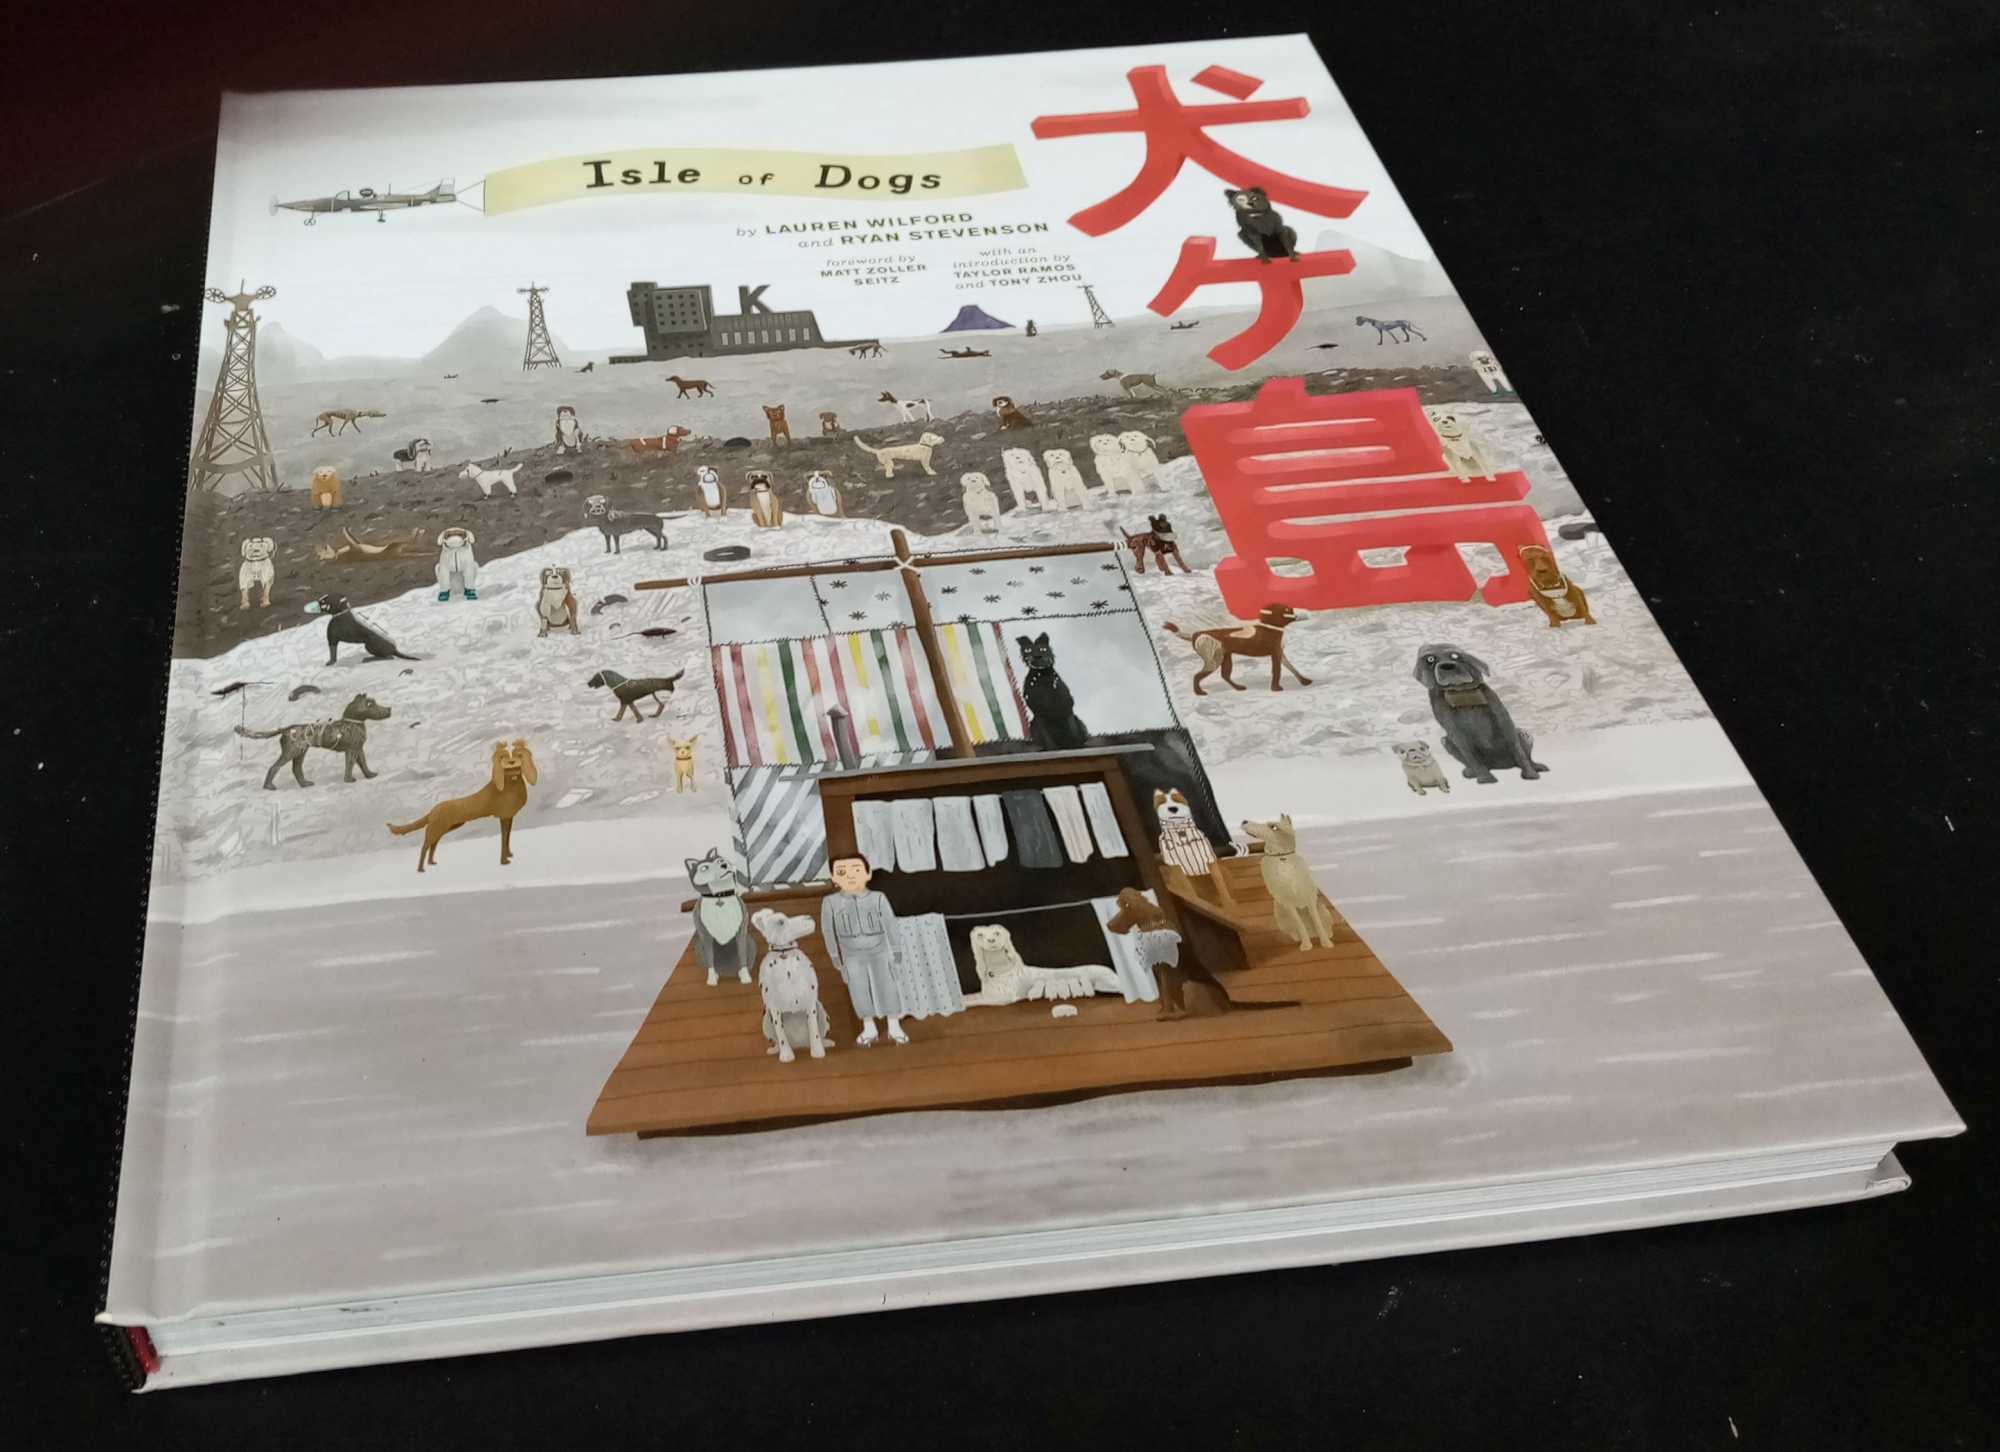 Lauren Wilford - The Wes Anderson Collection: Isle of Dogs